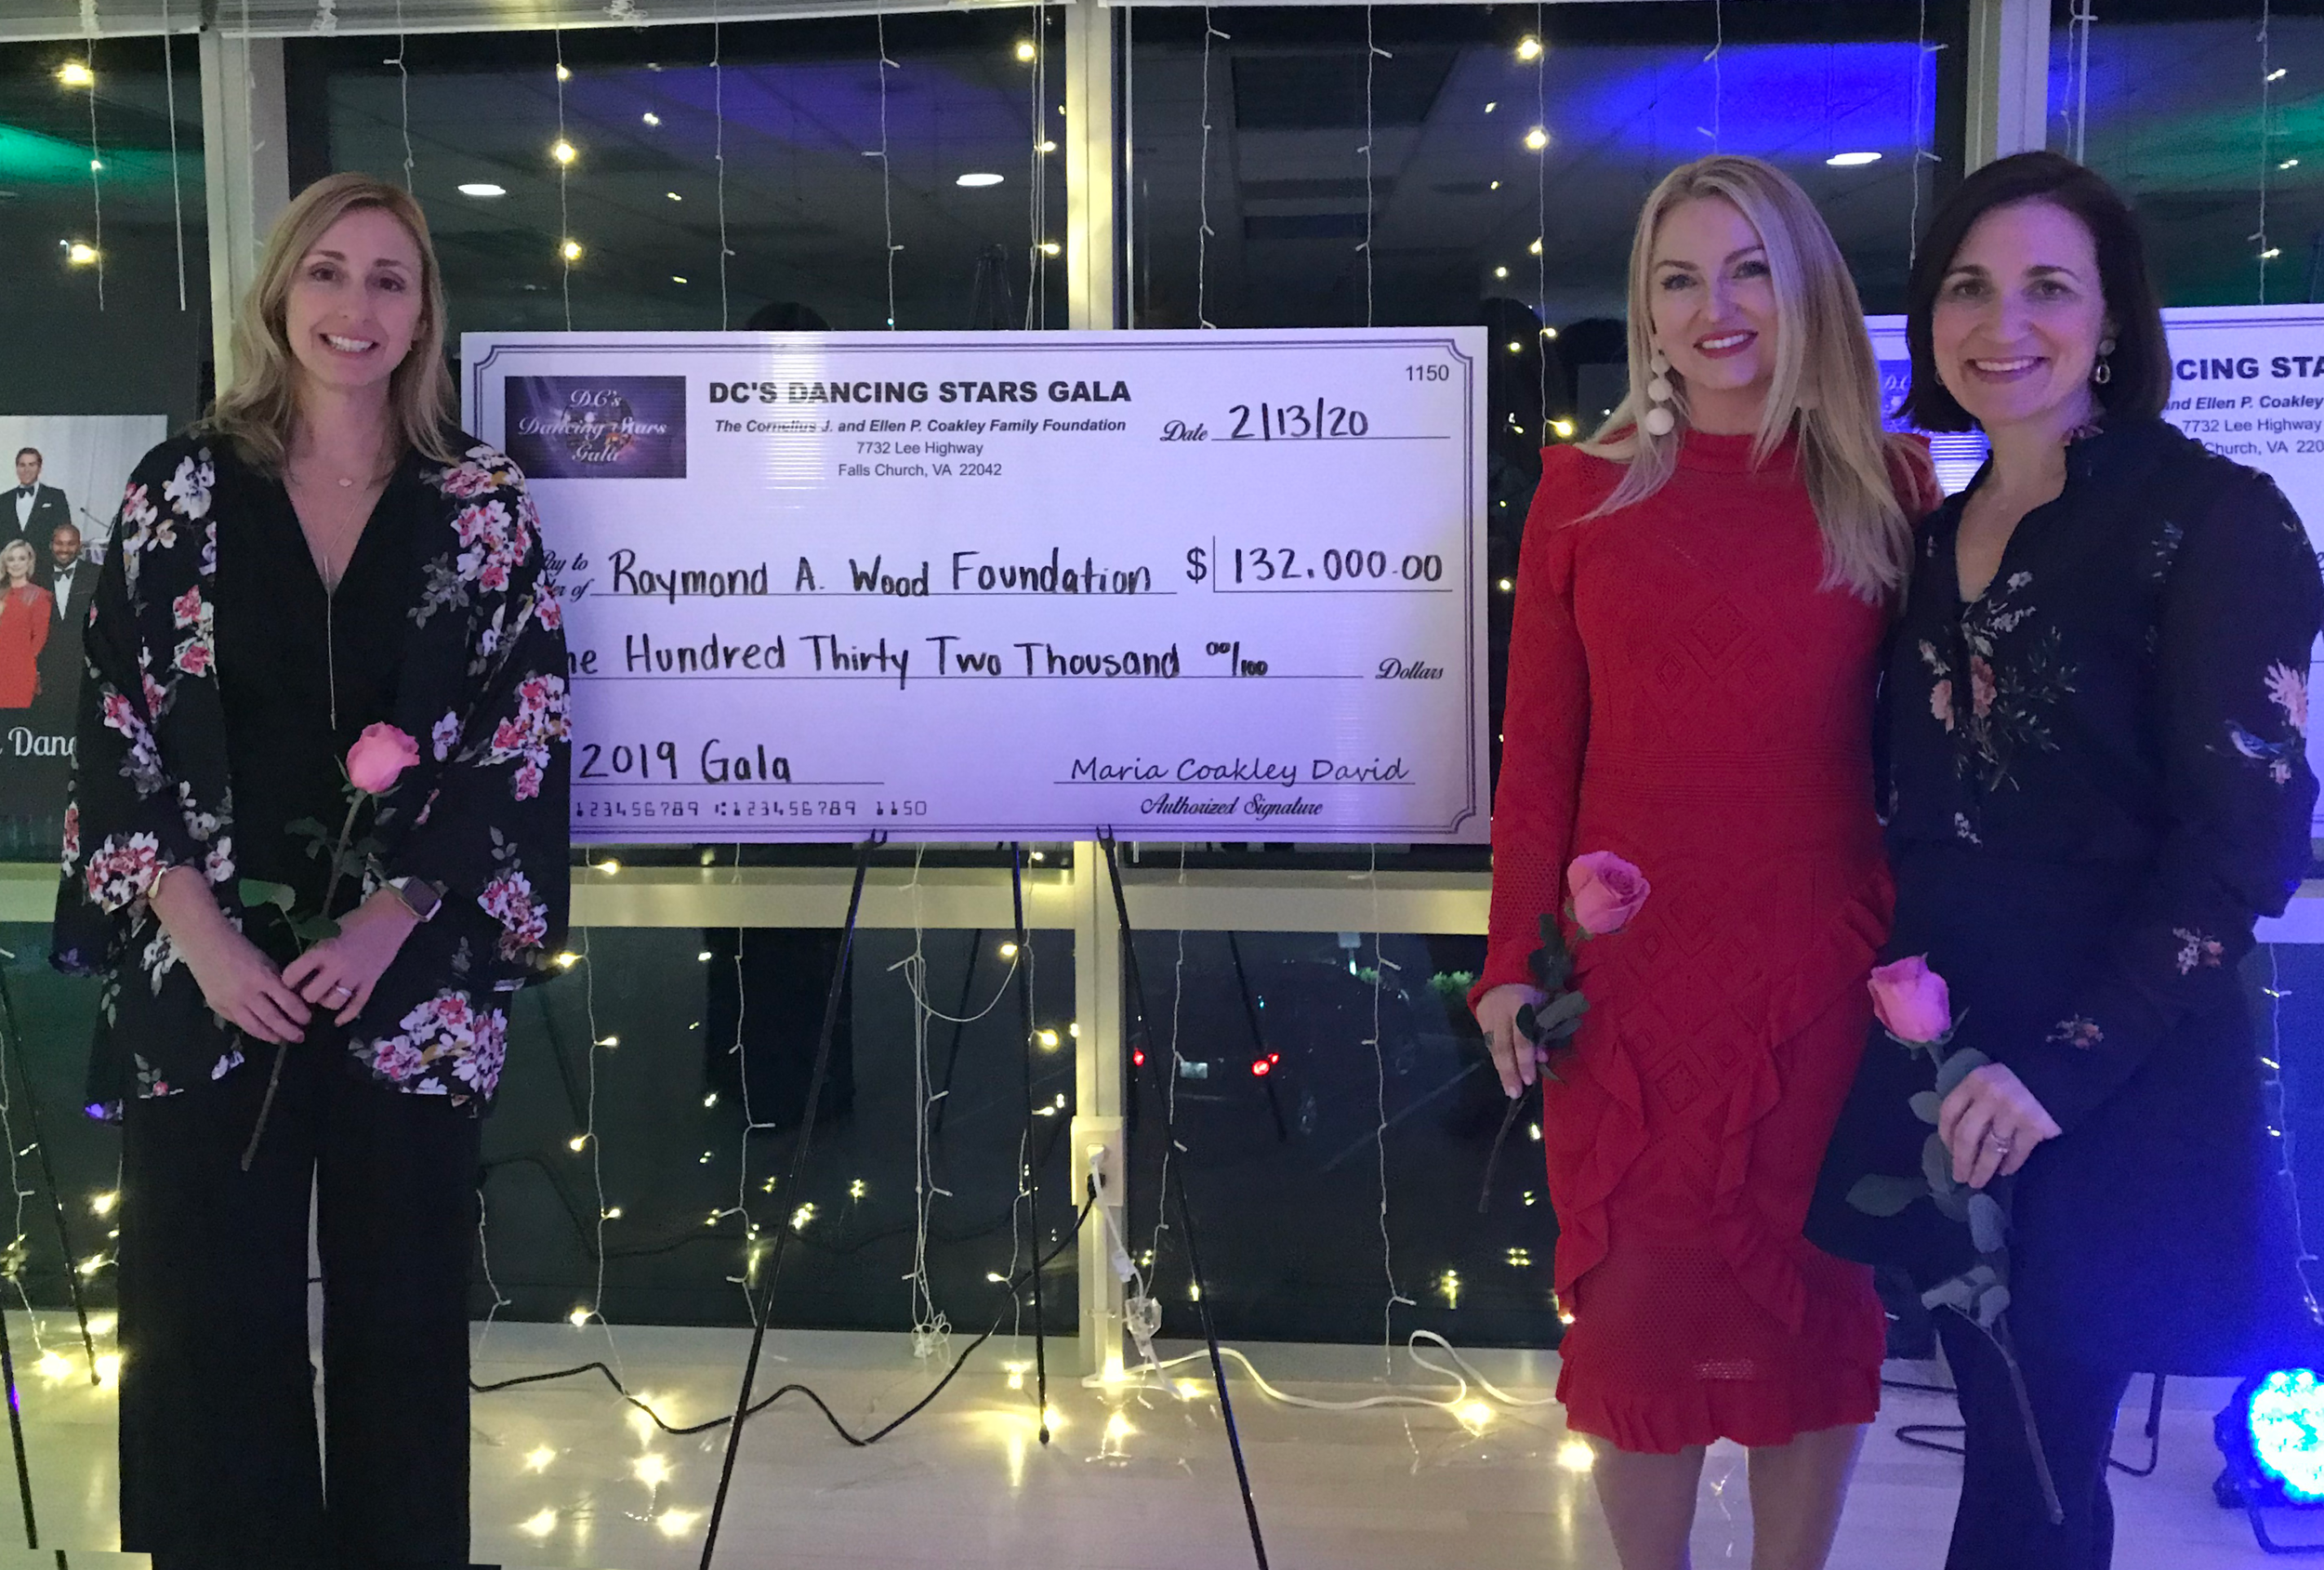 Amy Wood (Wood Foundation Director), Lindsey Keatley, (dancer and fundraiser), and Caroline Coakley (Wood Foundation board member) pose with the big check.